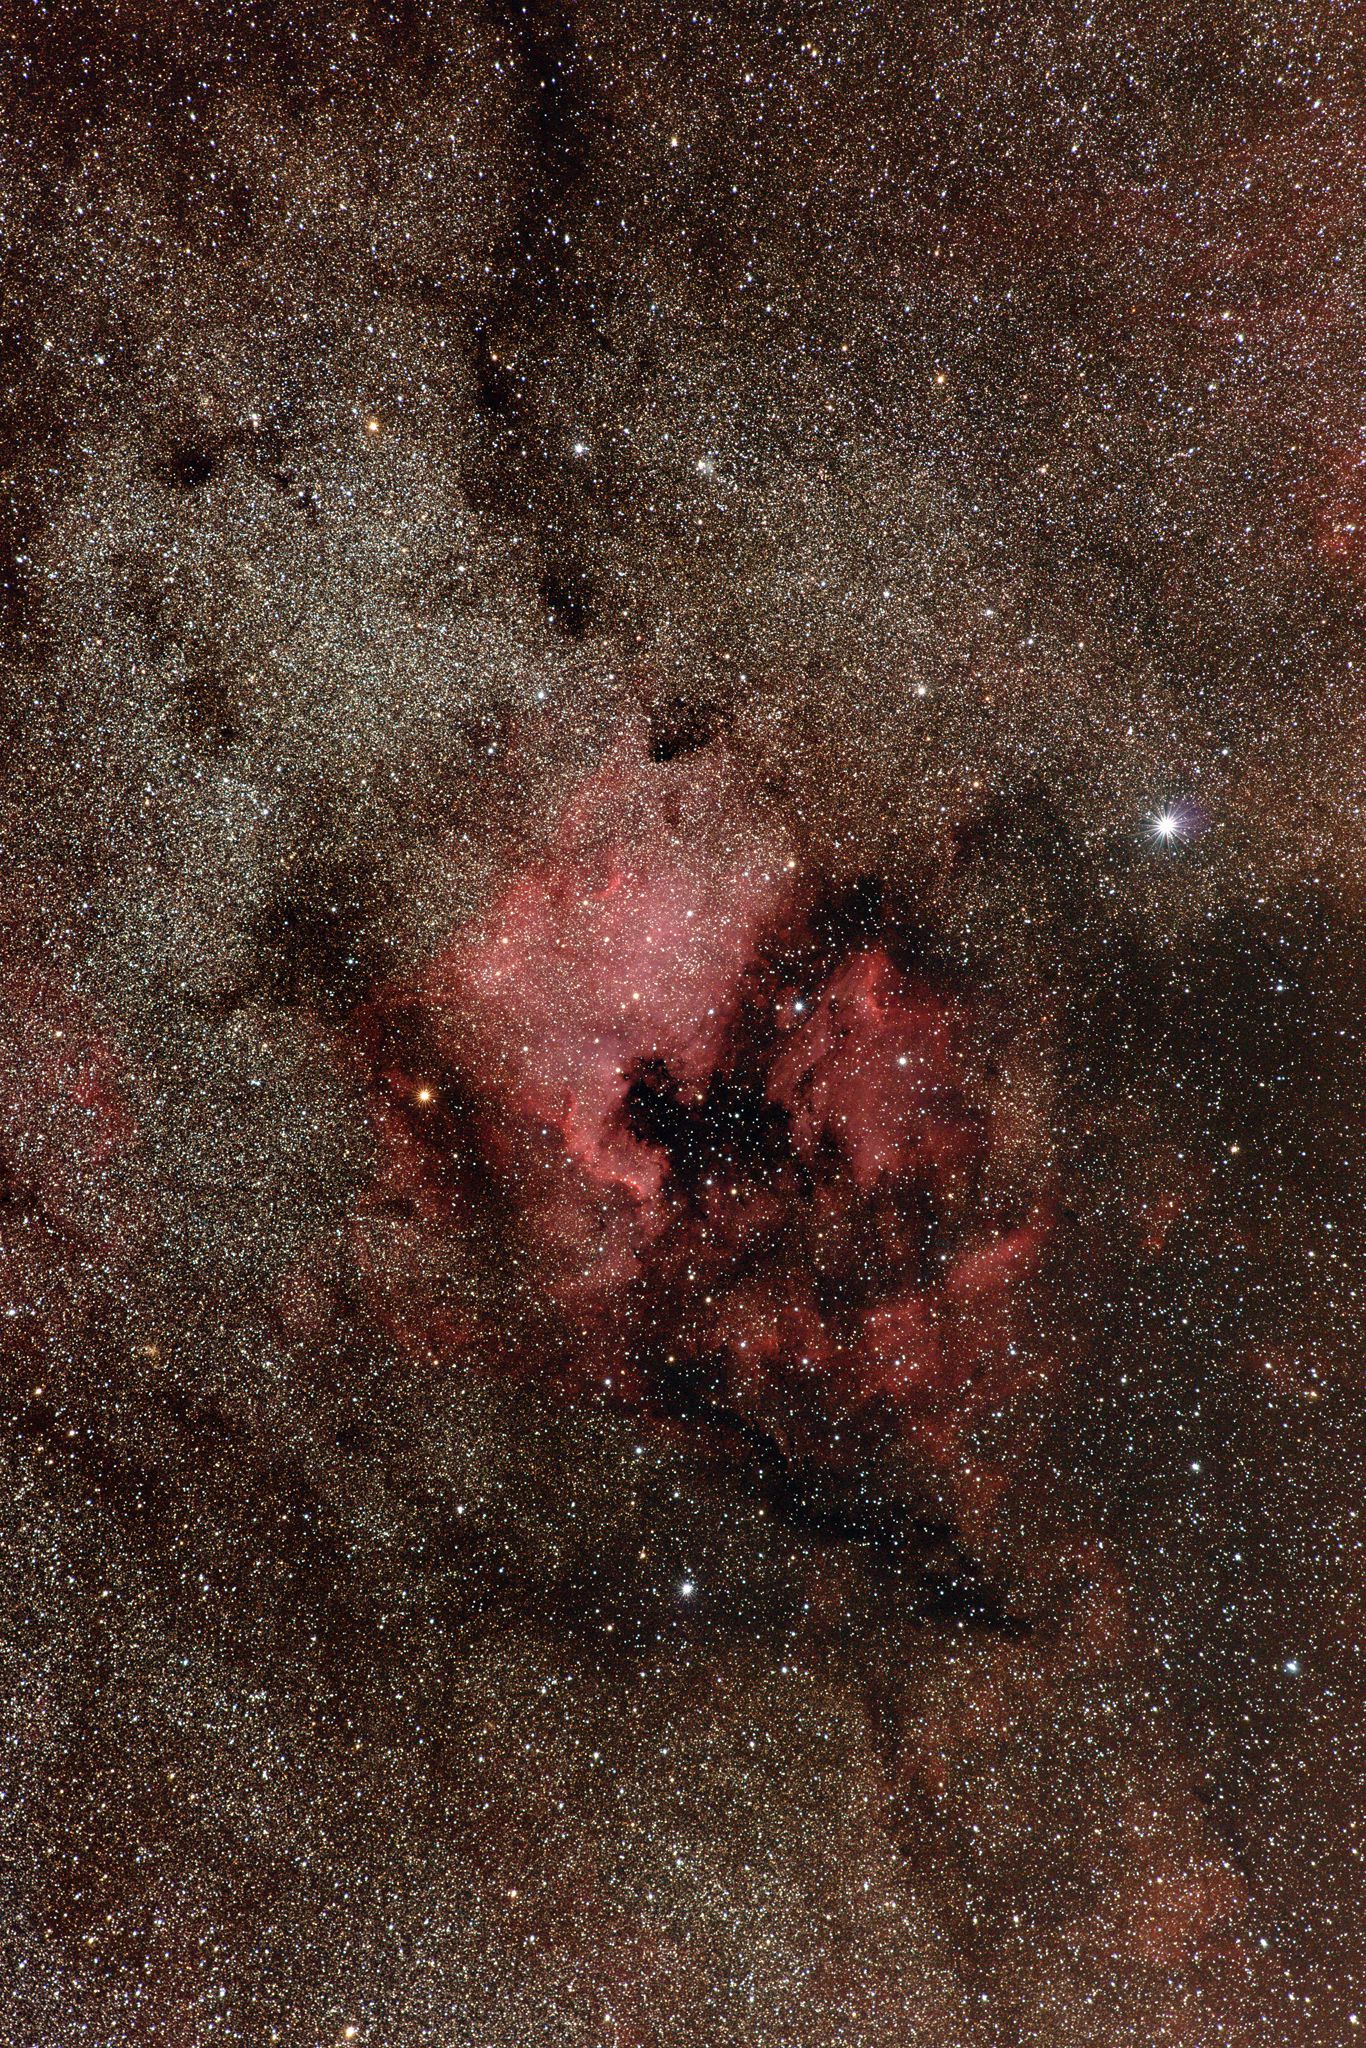 ngc7000-unfiltered-2048px.jpg